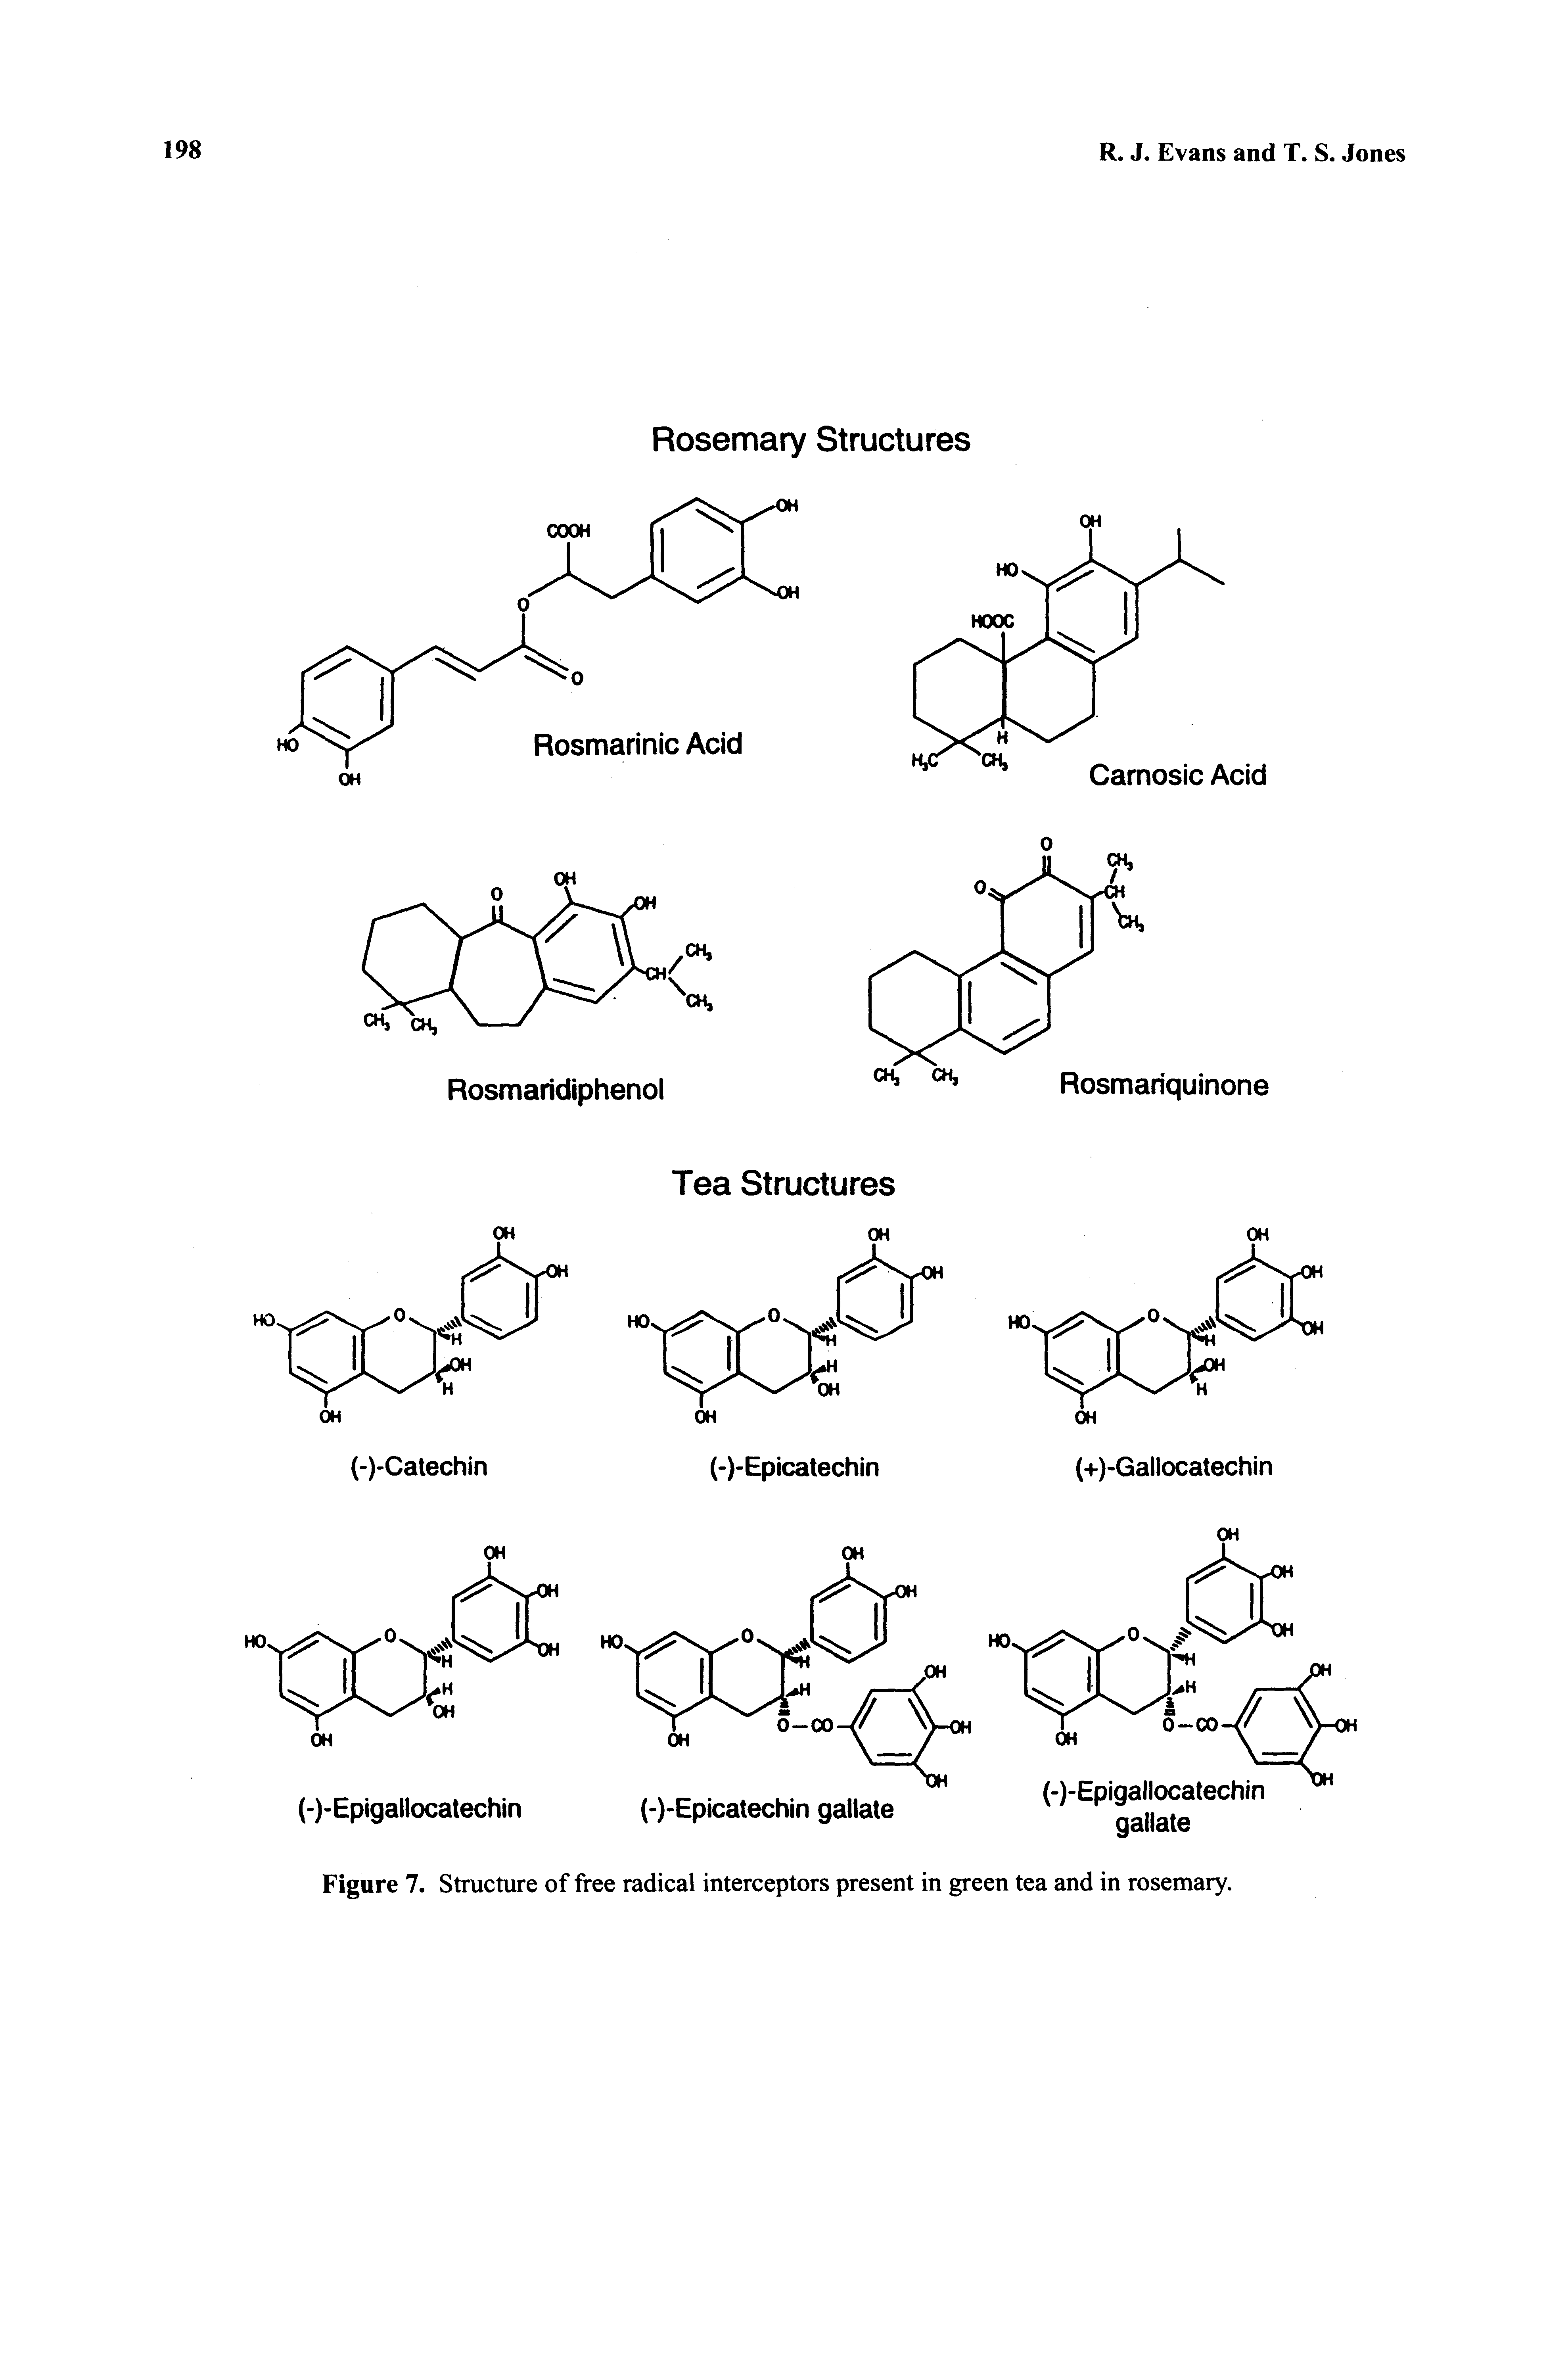 Figure 7. Structure of free radical interceptors present in green tea and in rosemary.